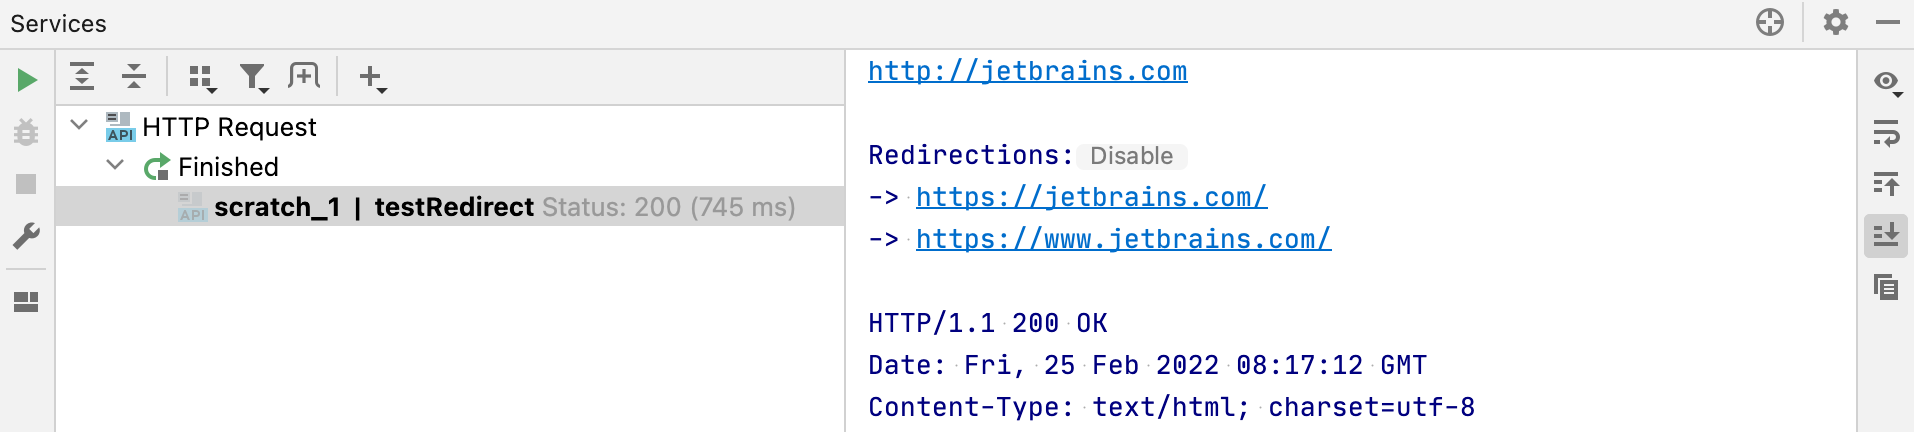 HTTP response with redirections